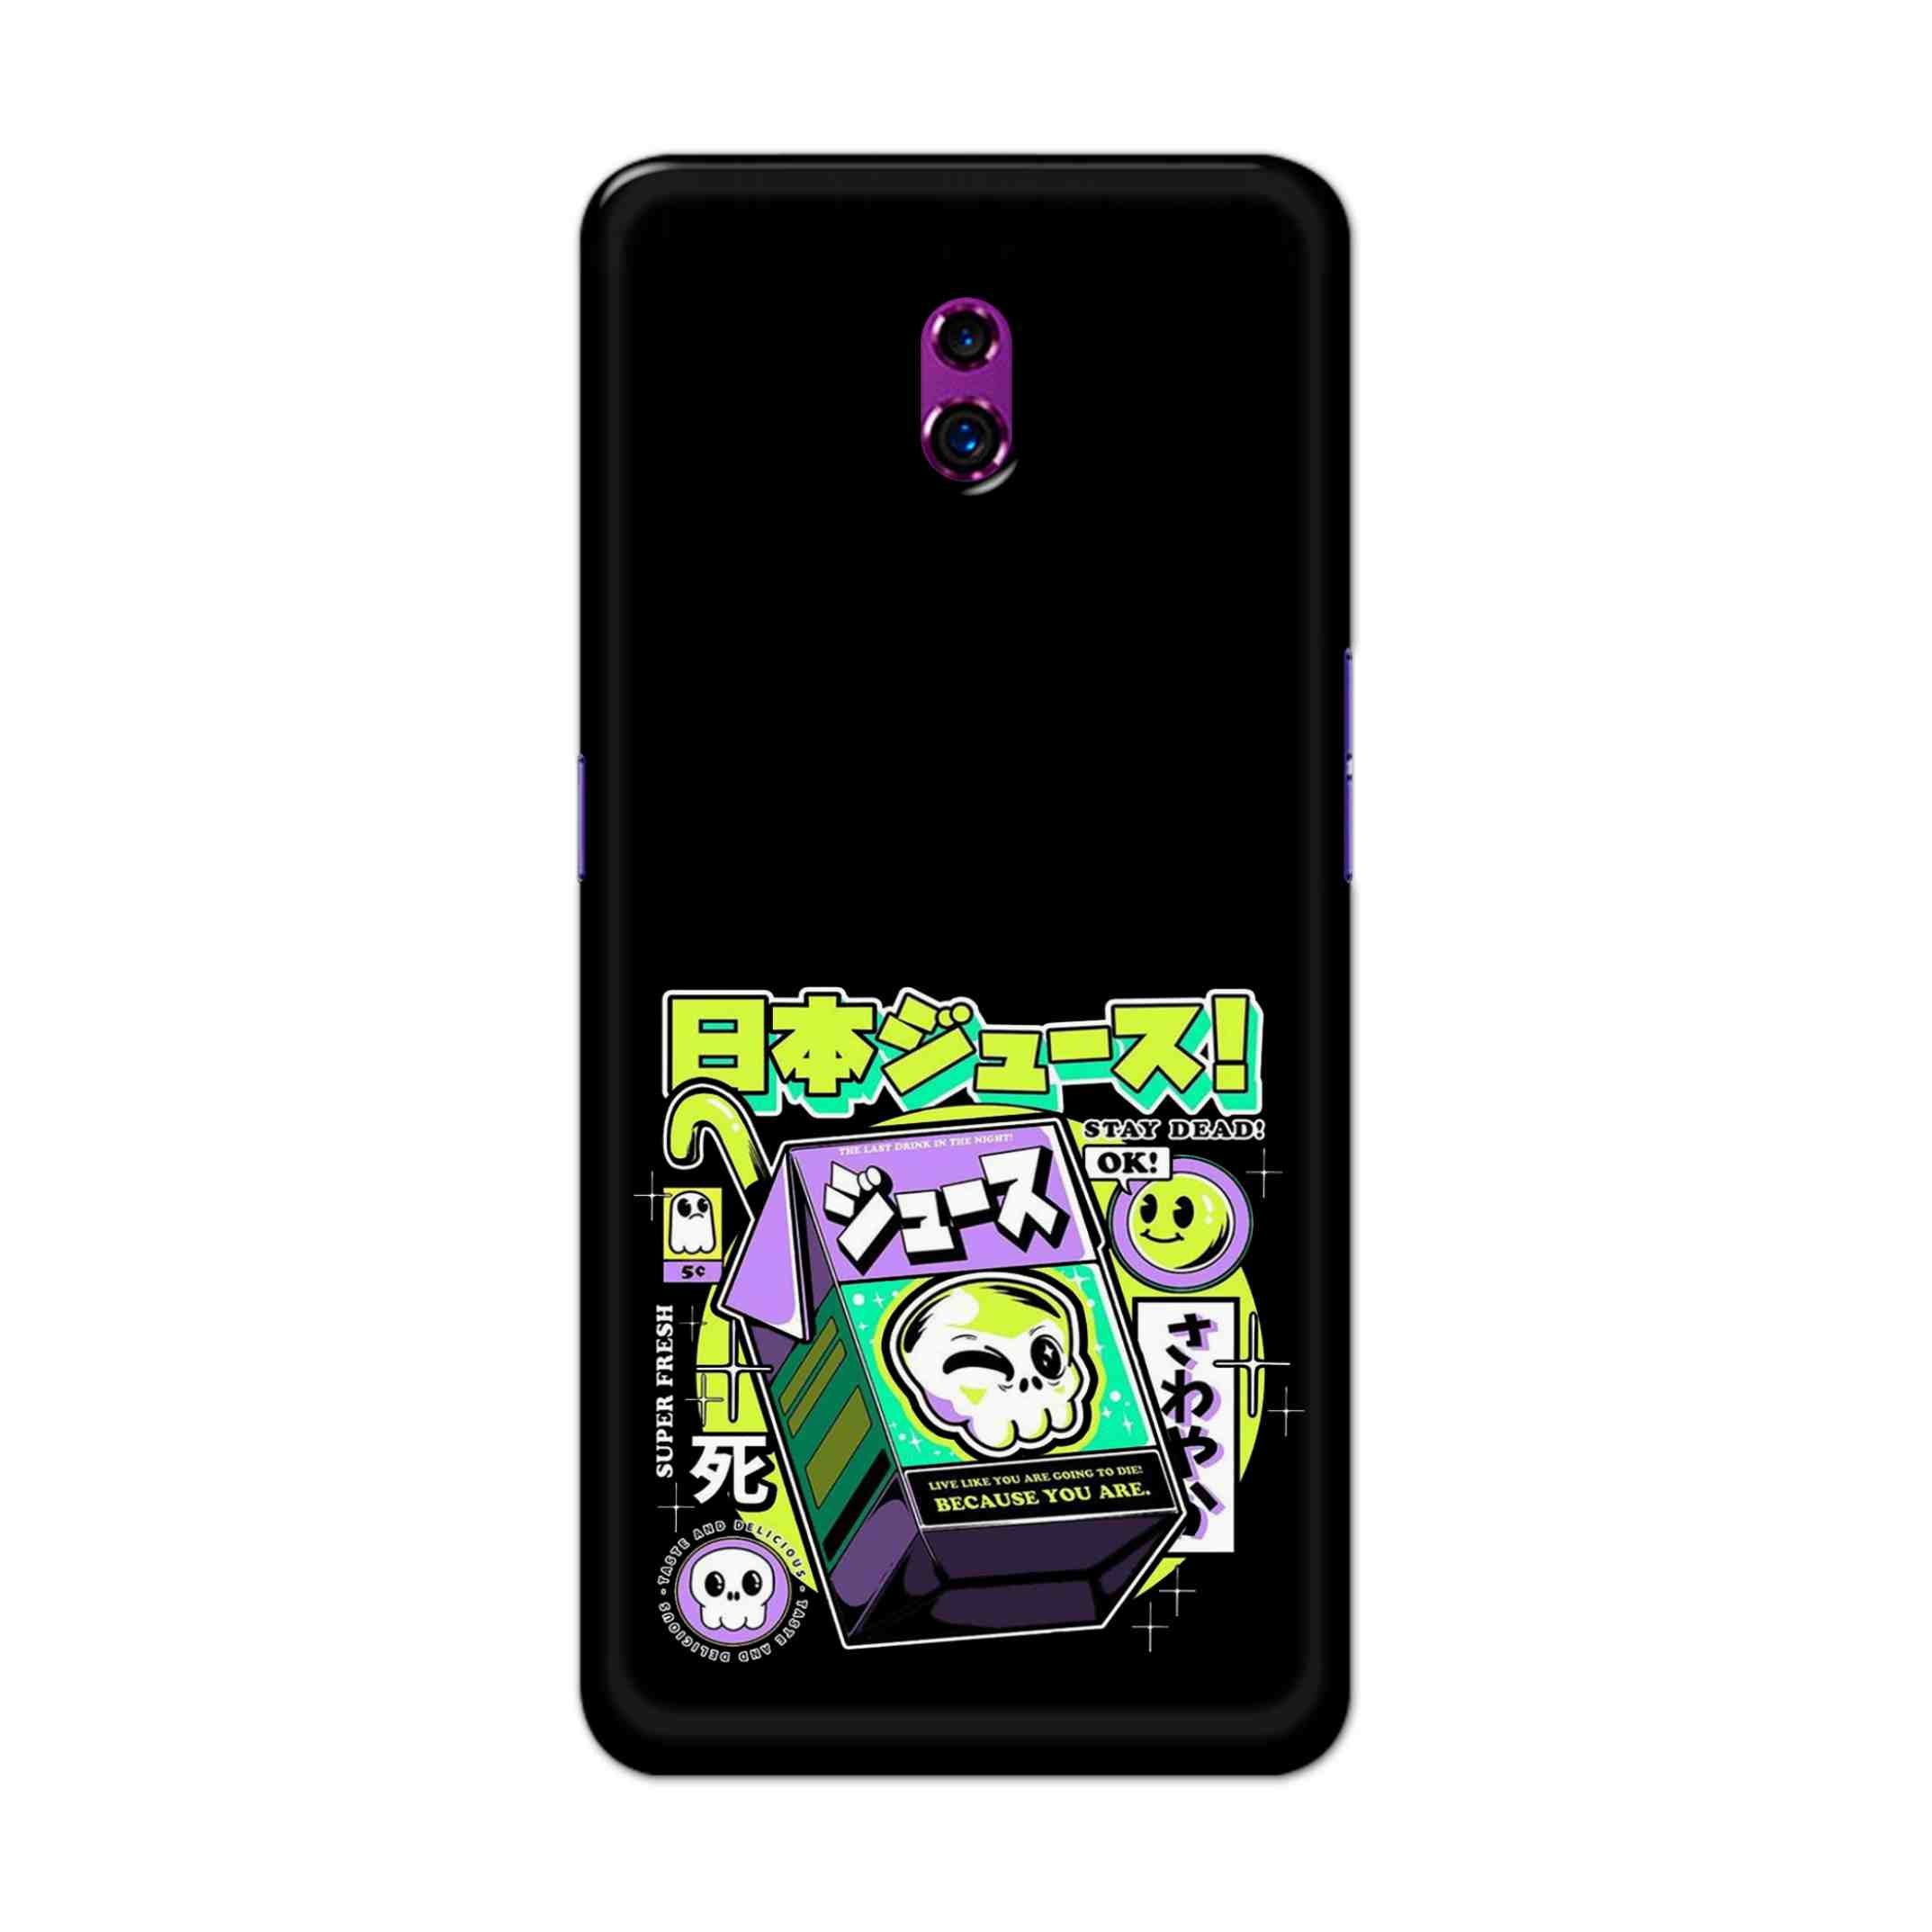 Buy Because You Are Hard Back Mobile Phone Case Cover For Oppo Reno Online